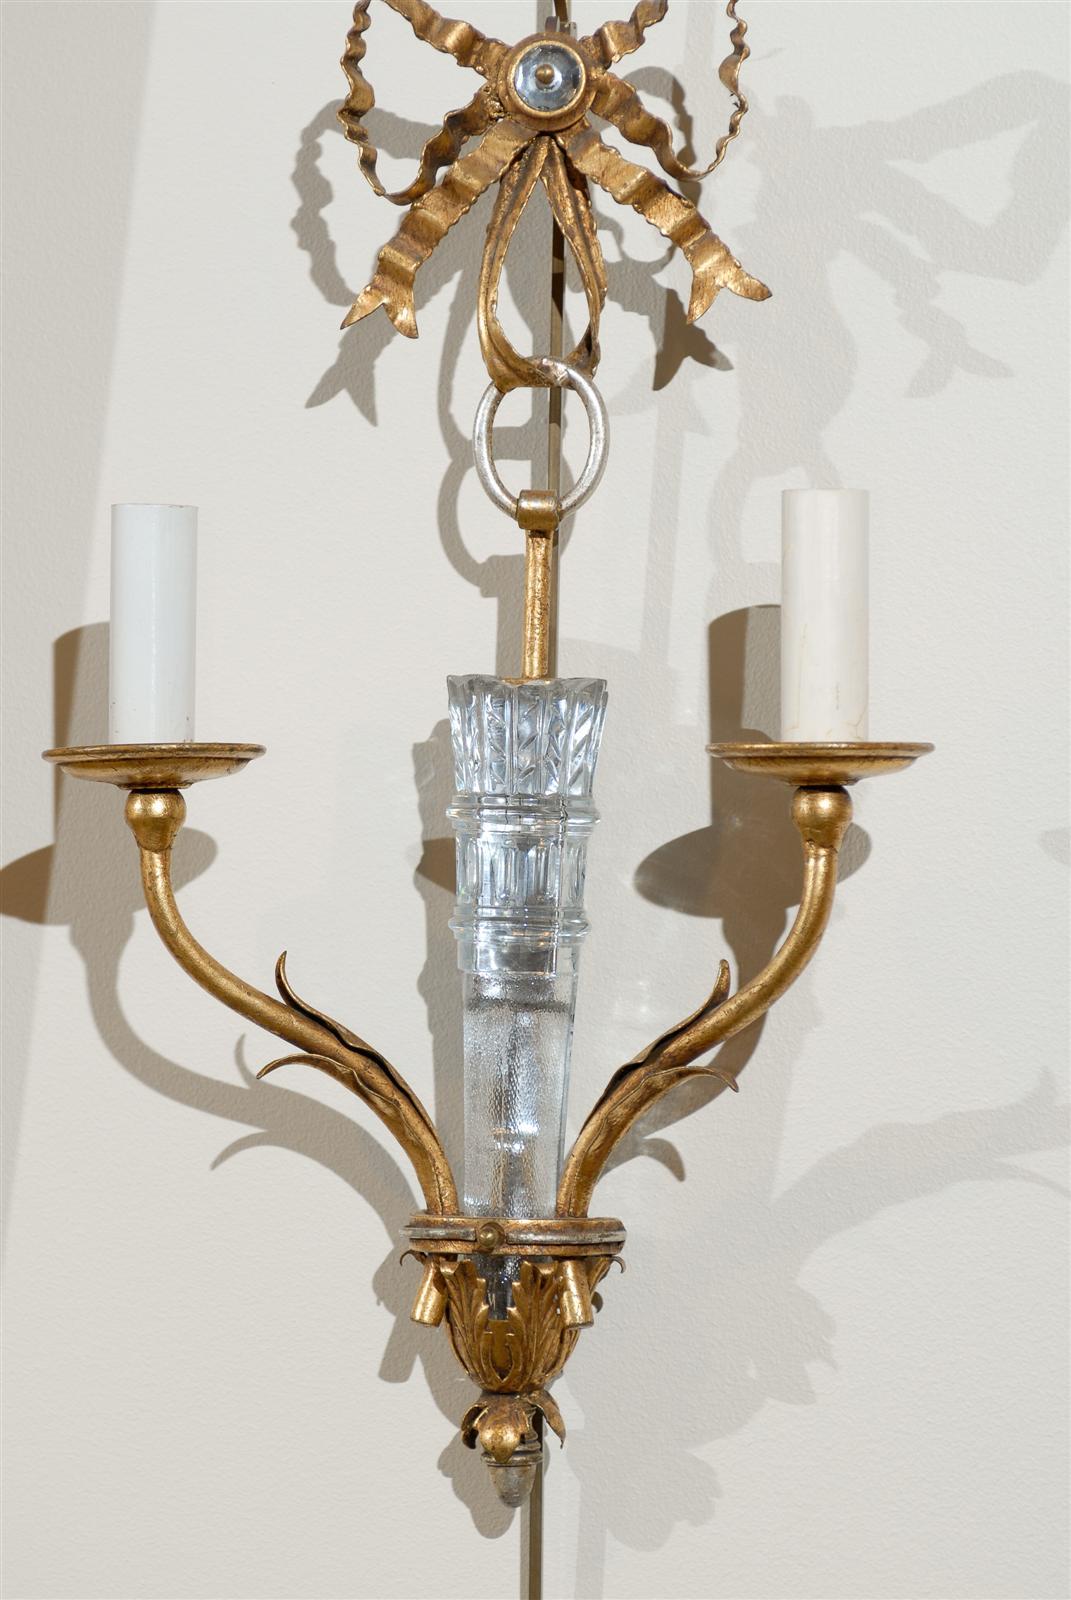 Mid Century French Bagues Crystal Sconces, Circa 1940
This stunning pair of French Bagues sconces have a very delicate design.  The bronze bow atop the pair of candlesticks is centered with a crystal that catches the light and compliments the